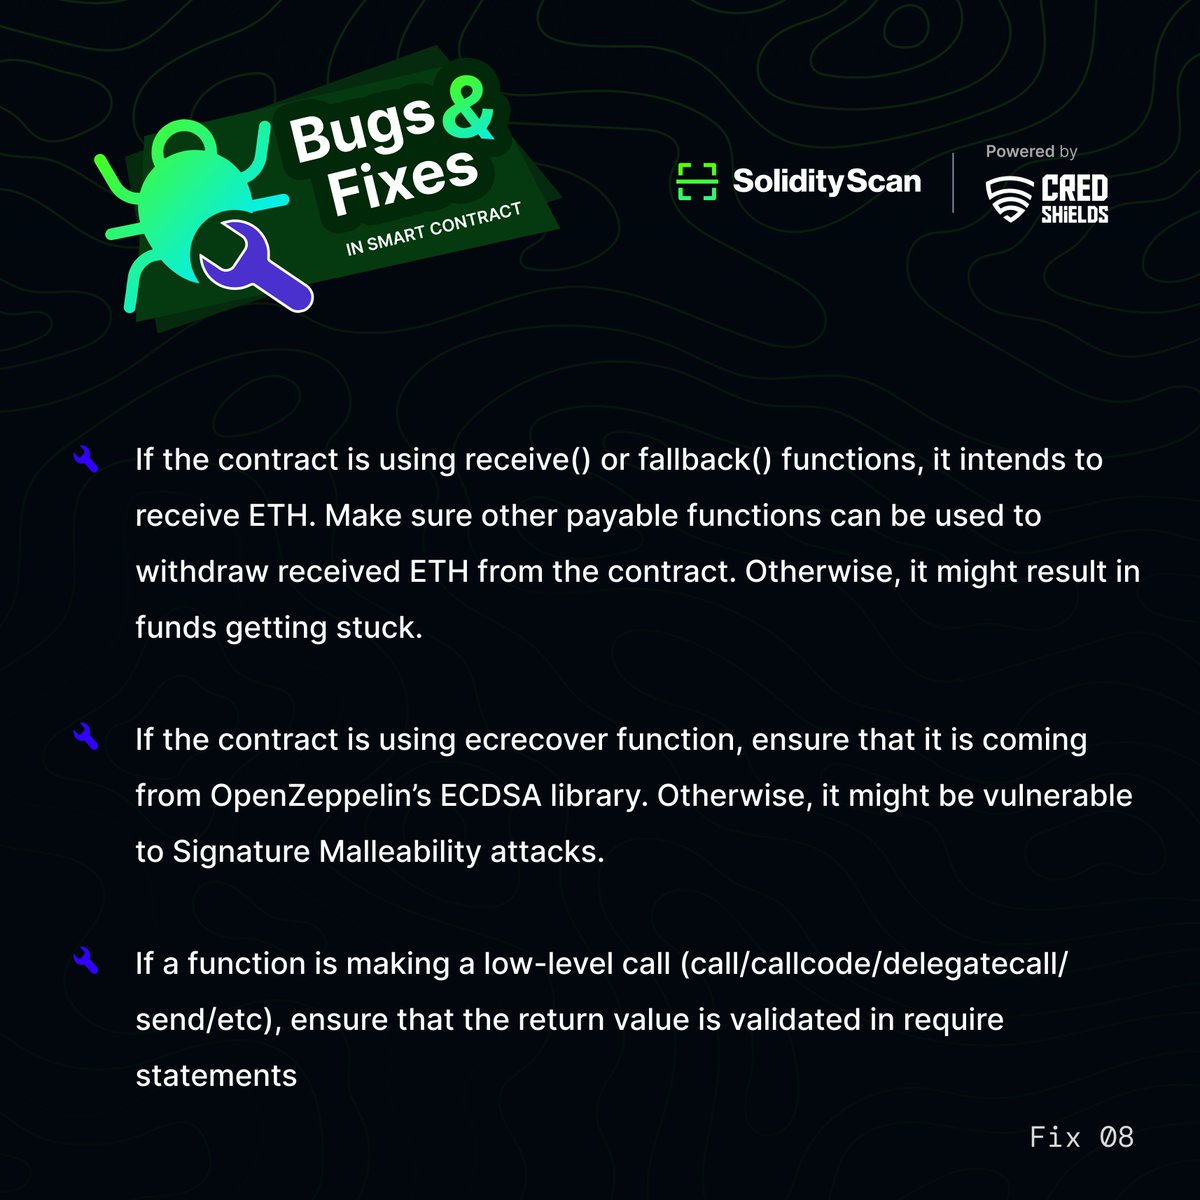 Bugs beware! We've got the antidote. Stay tuned for savvy fixes and code-saving tips. Let's make your code smoother than ever! 🐞 #BugHunt #SmartContracts #Web3